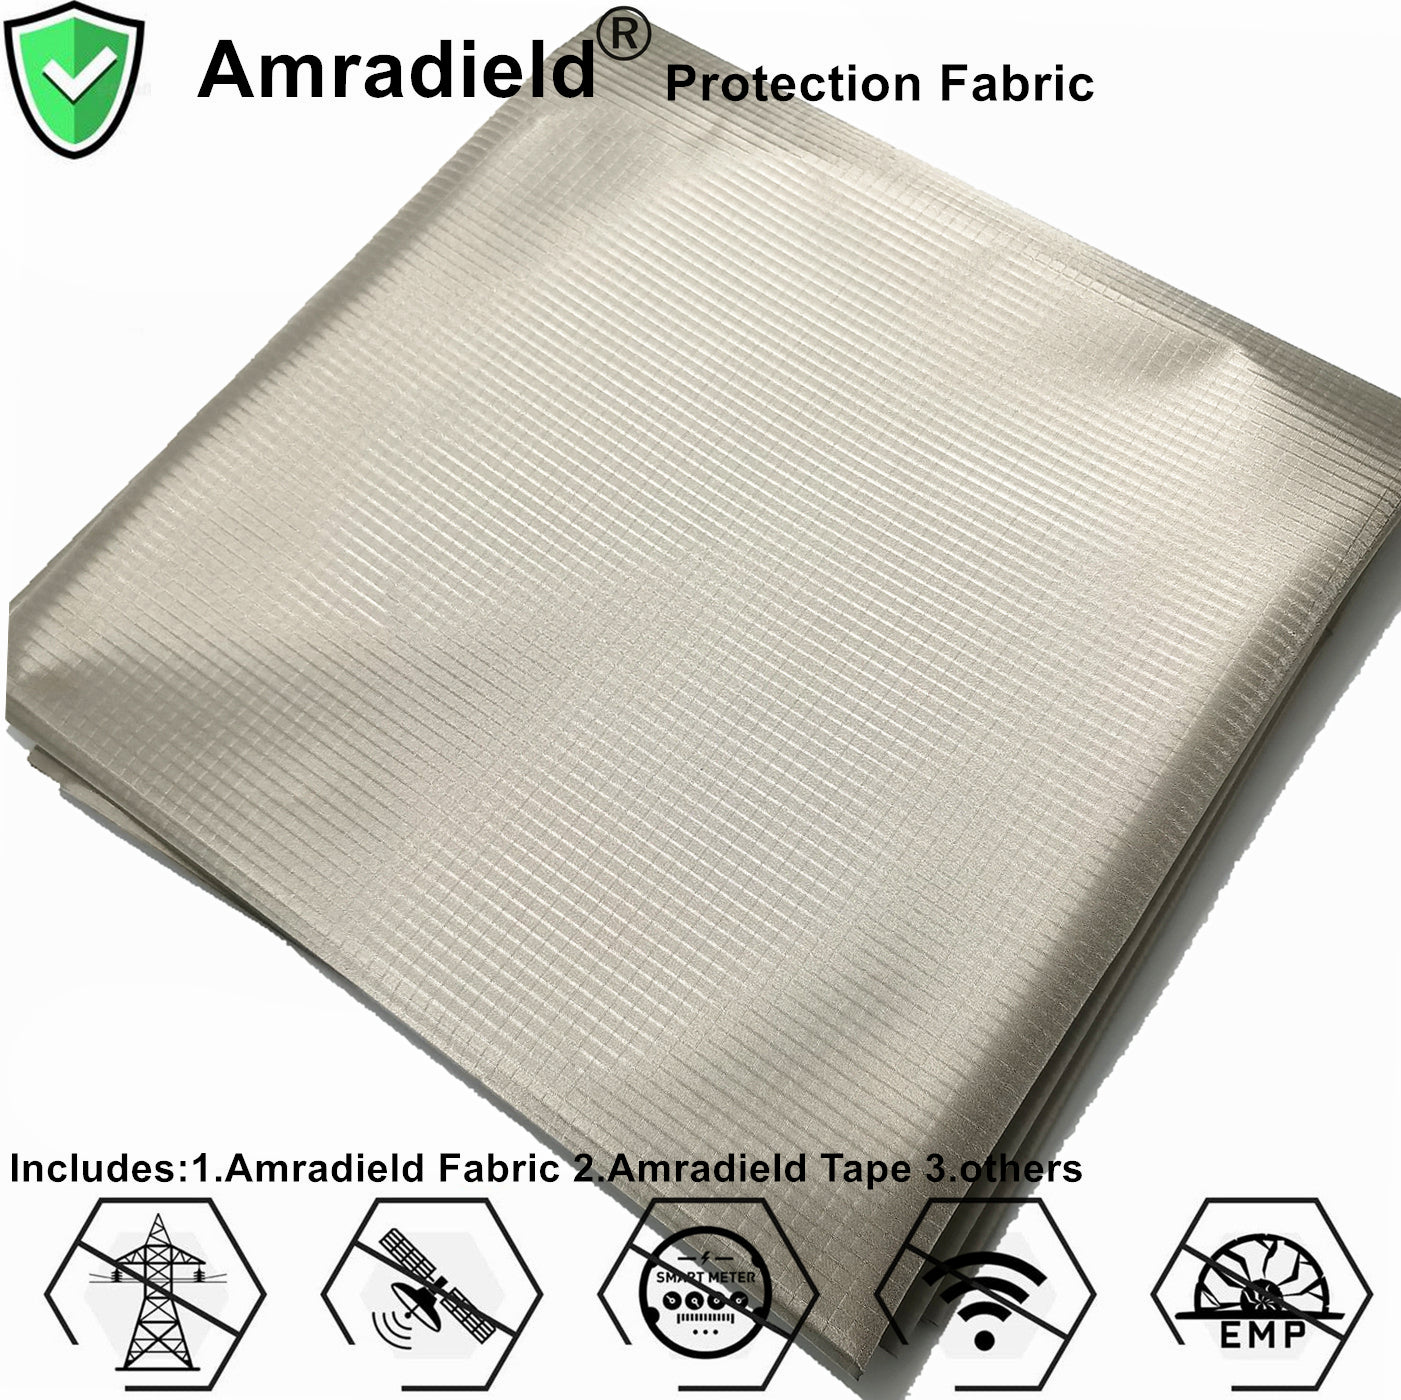 EMF-Reducing Cloth – Practical Disaster Preparedness for the Family